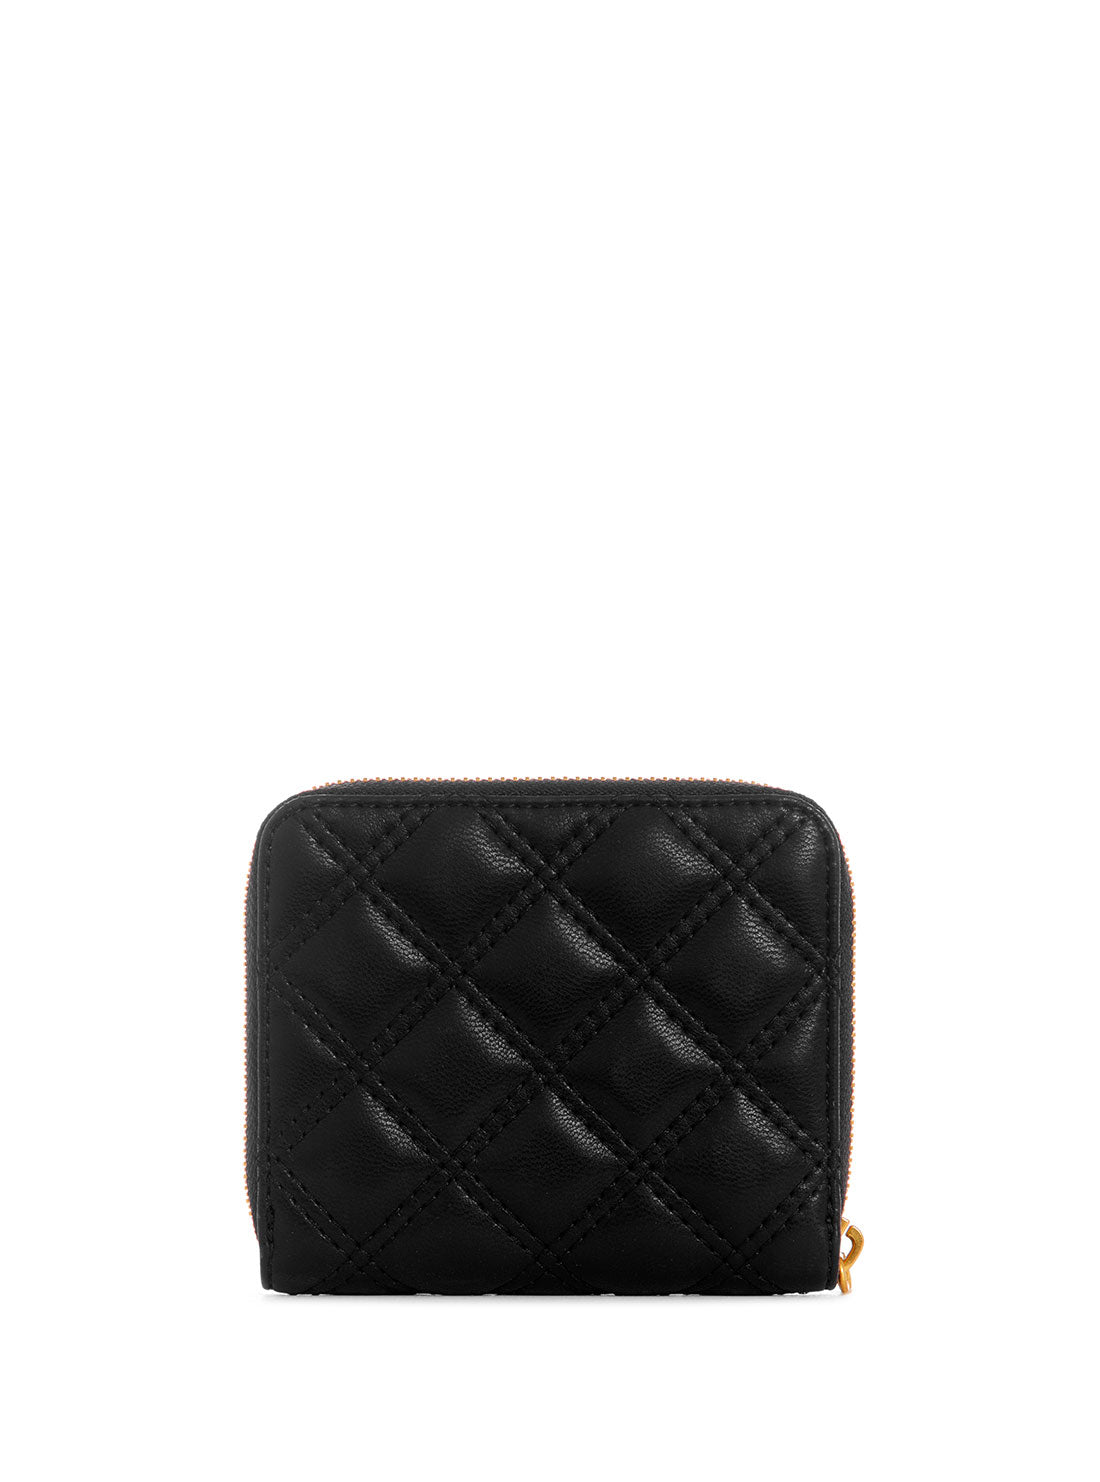 GUESS Black Giully Small Wallet back view